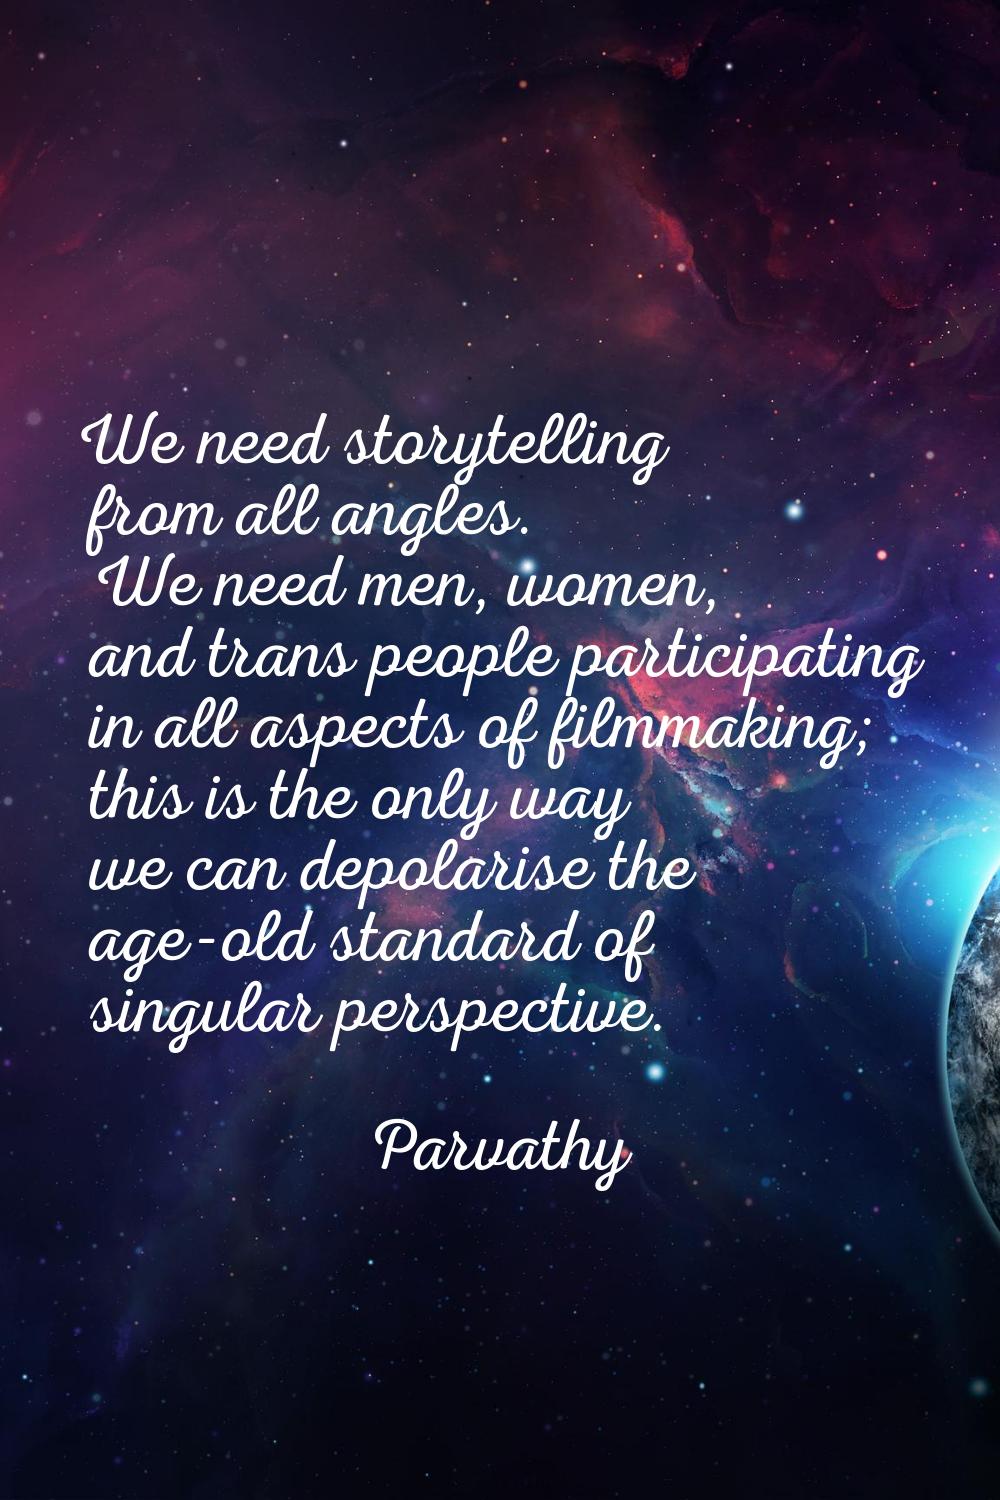 We need storytelling from all angles. We need men, women, and trans people participating in all asp